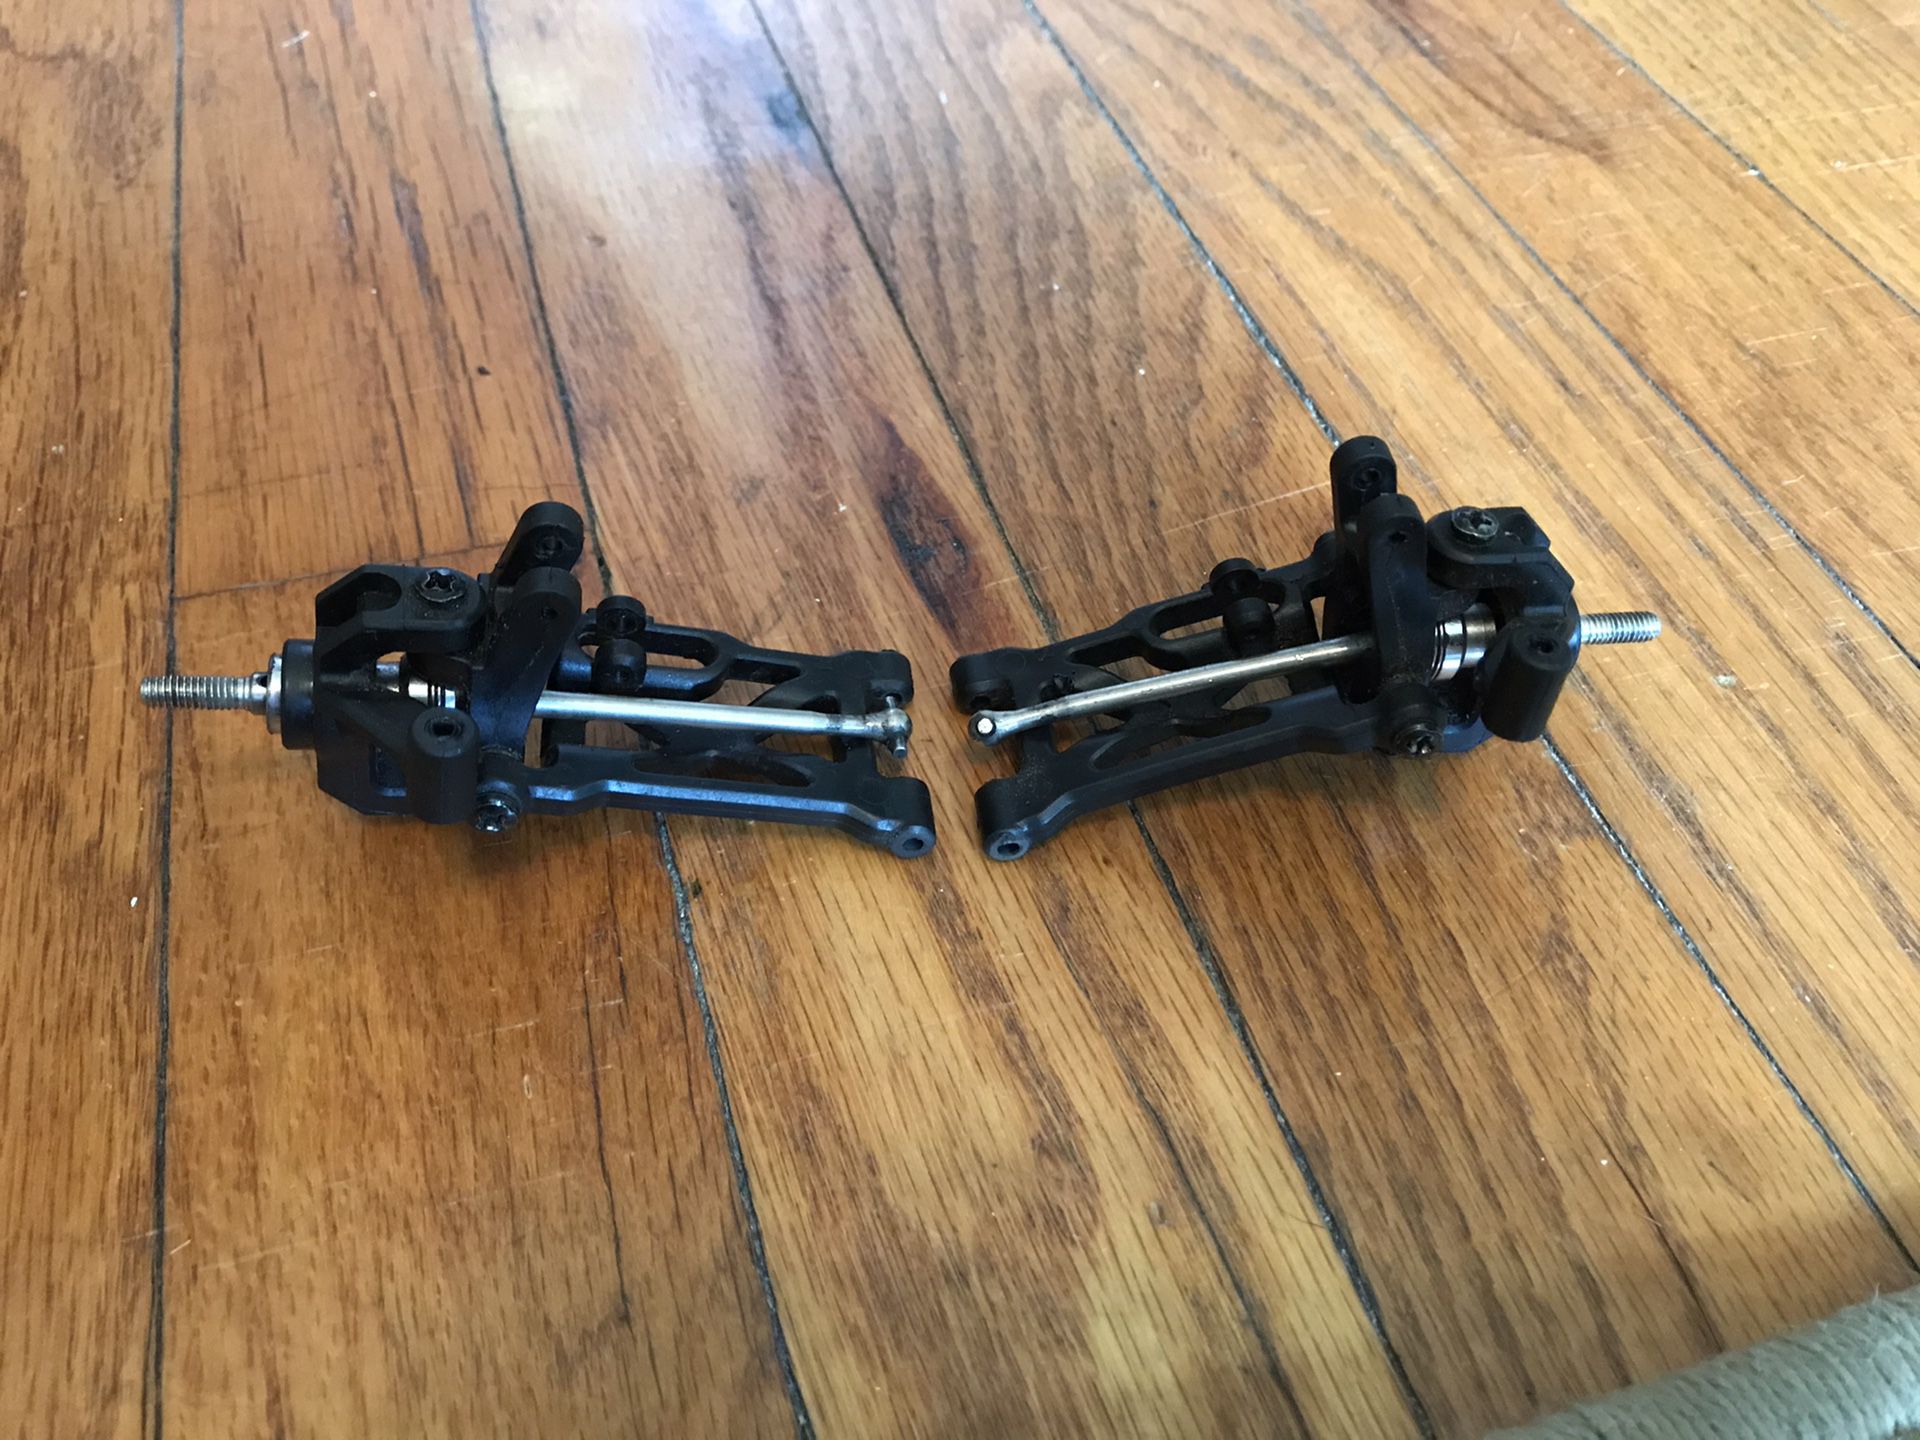 Wheel arms for wl toys 12428 remote control car